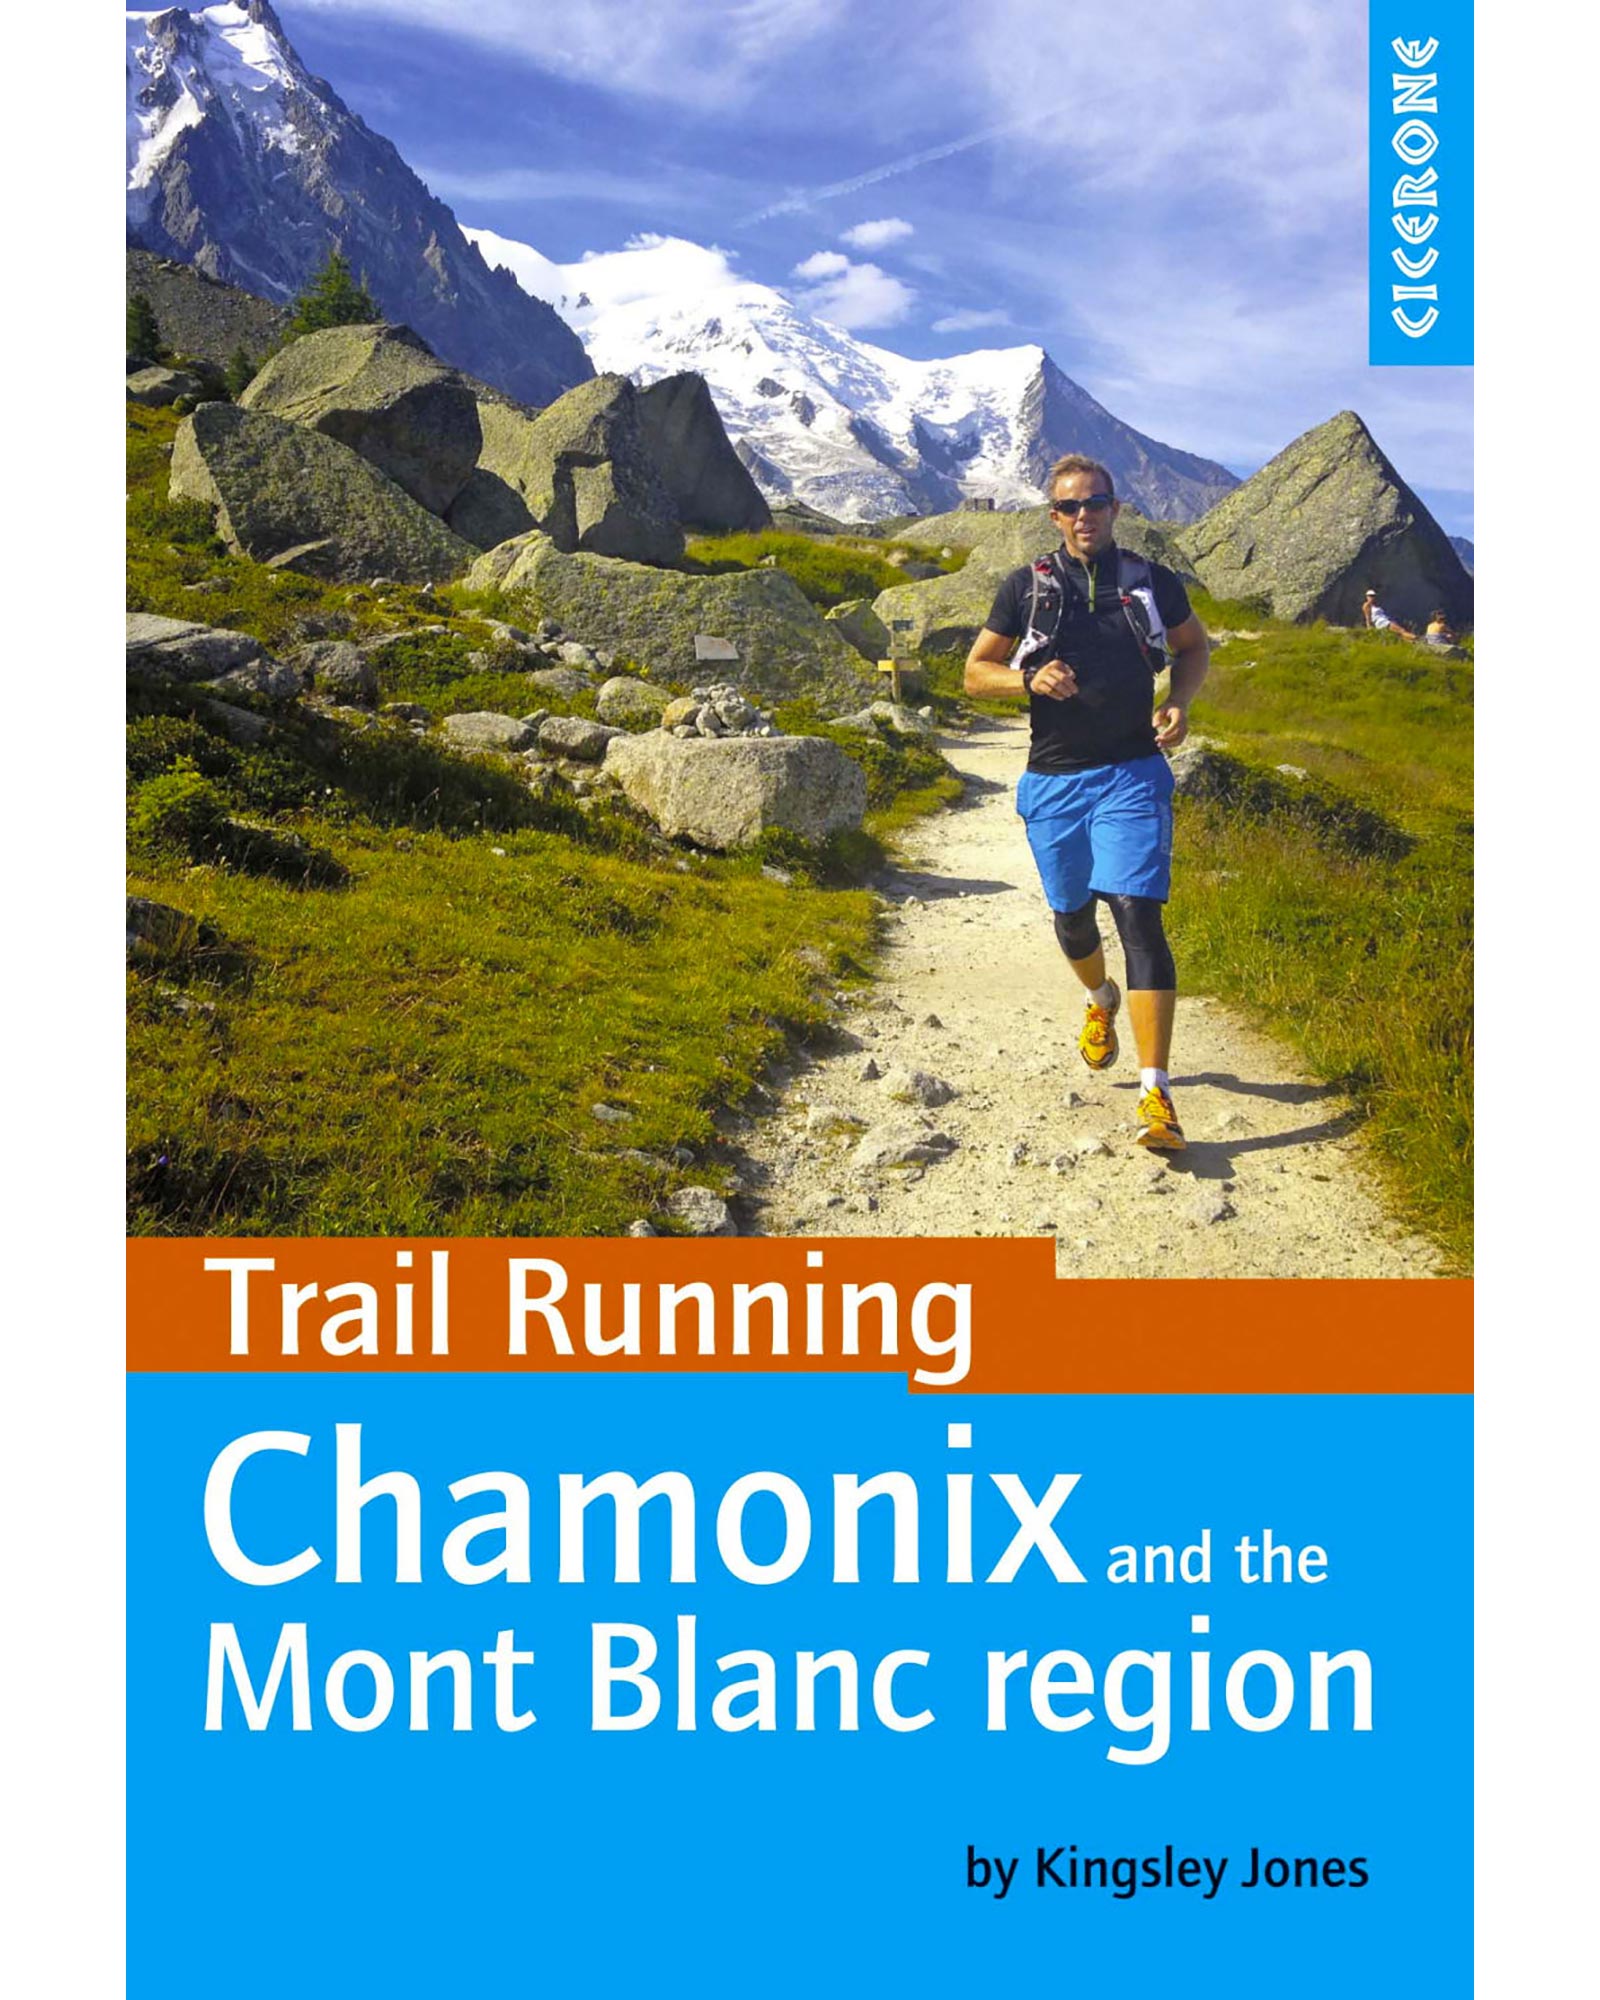 Cicerone Trail Running - Chamonix and the Mont Blanc Region Guide Book